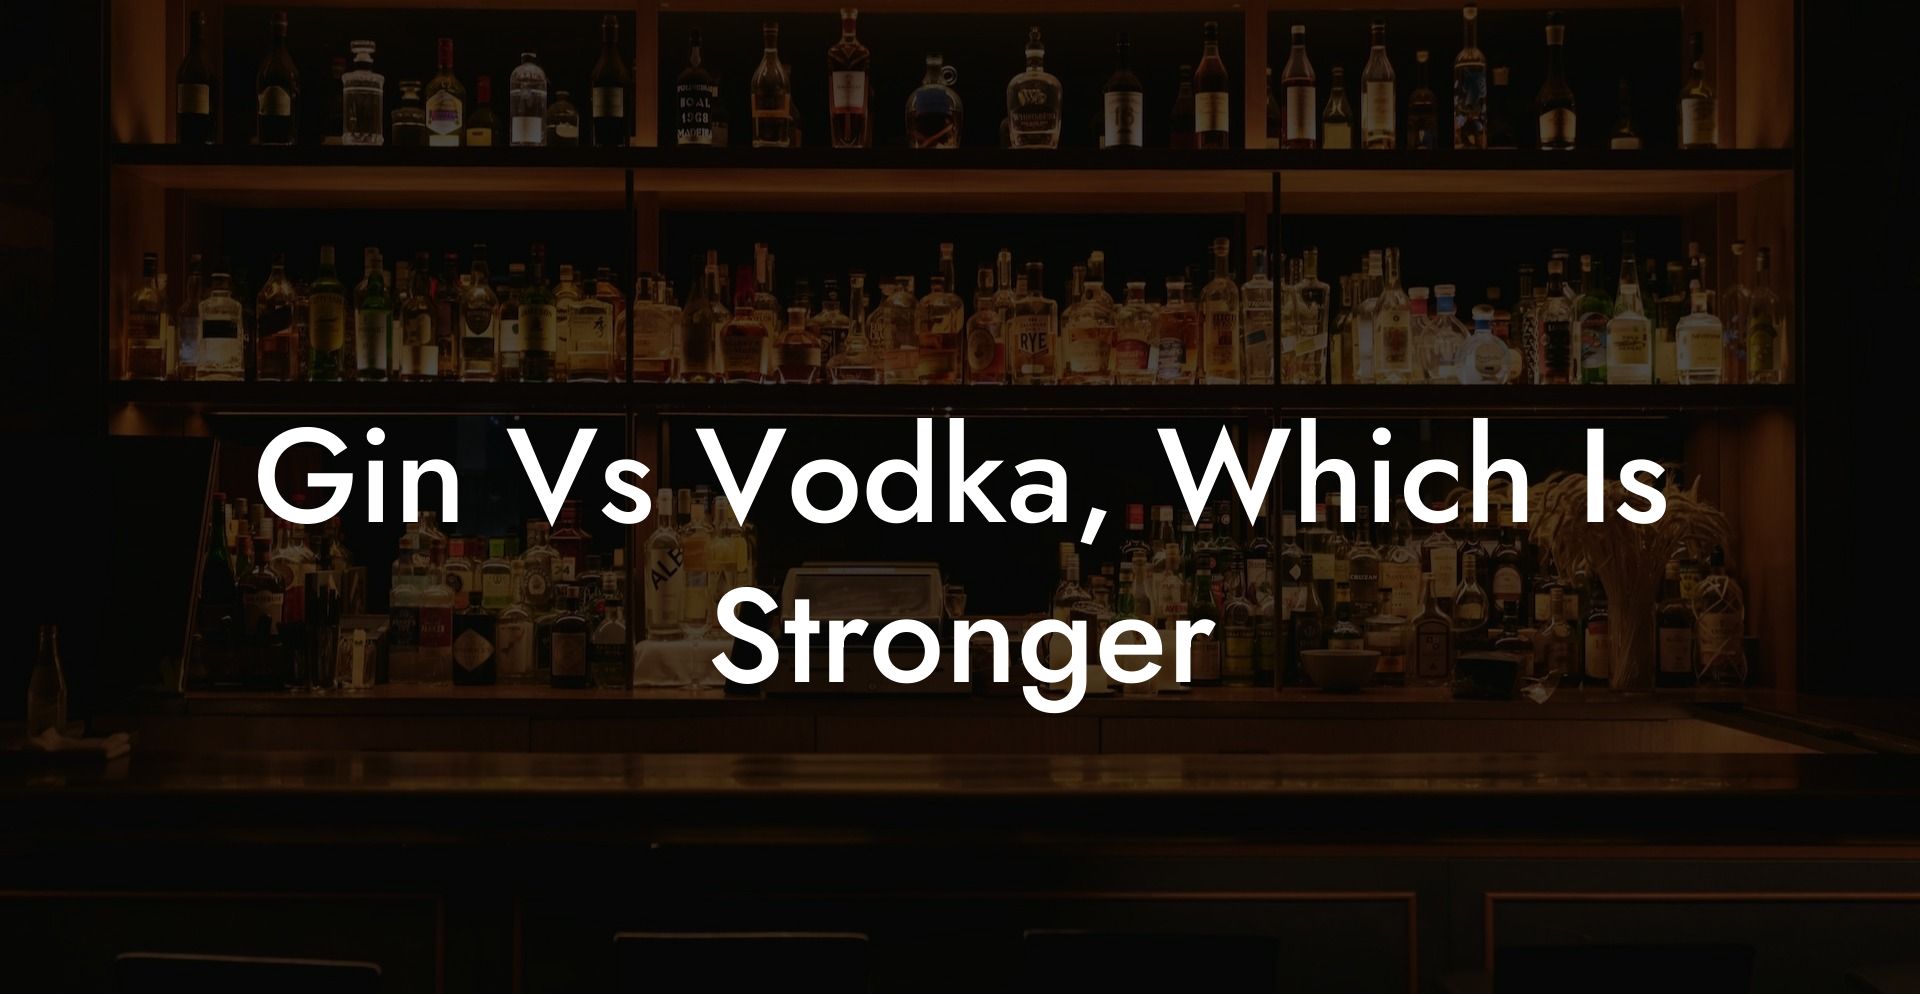 Gin Vs Vodka, Which Is Stronger